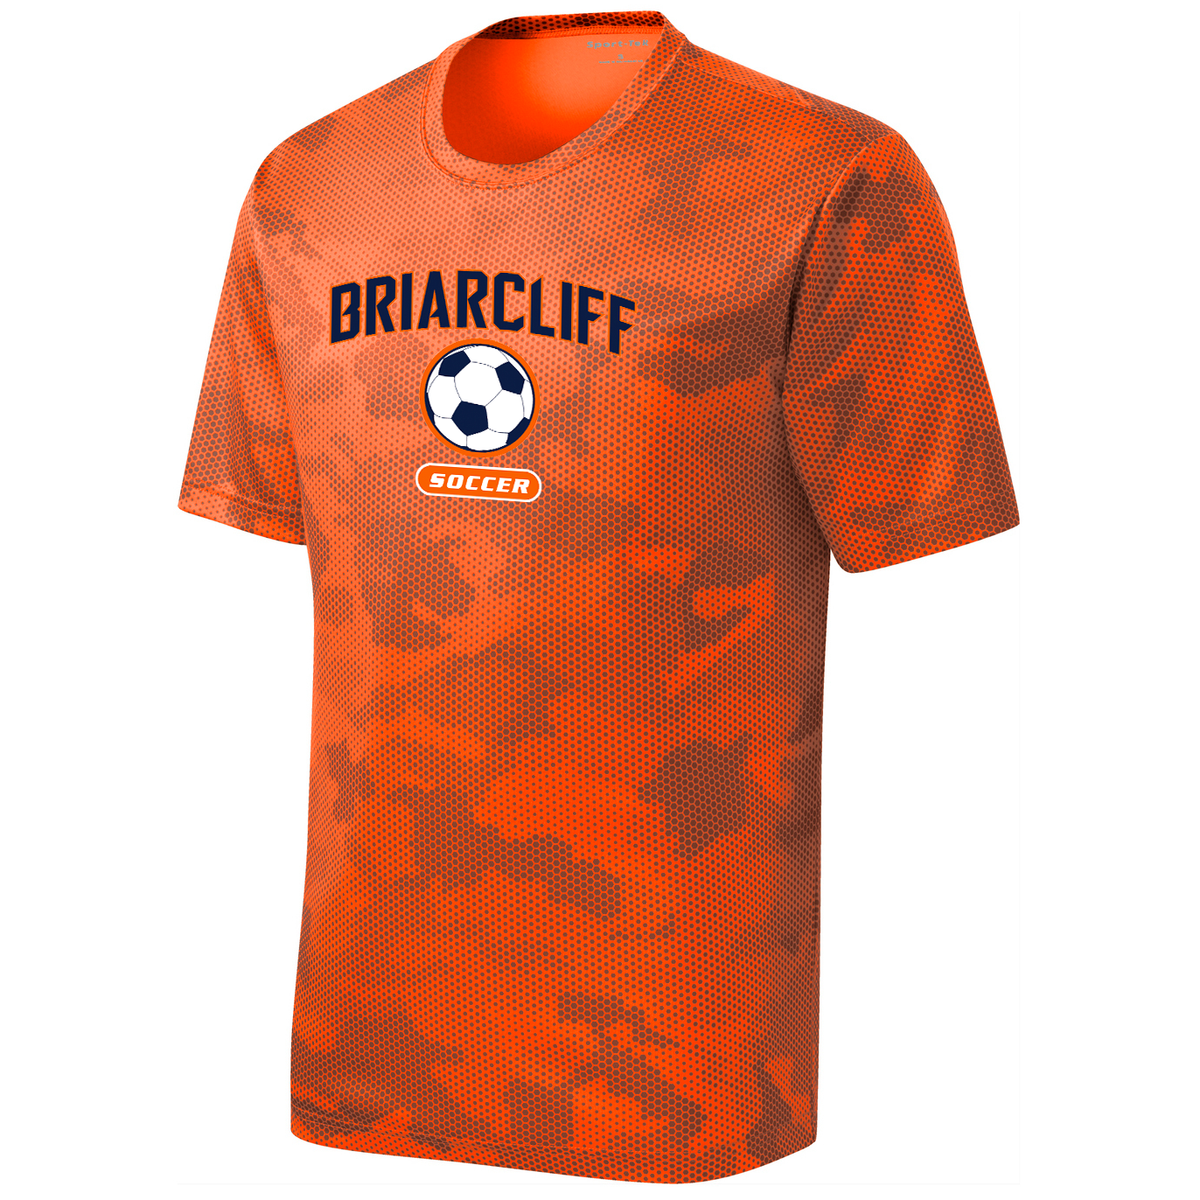 Briarcliff Soccer CamoHex Tee